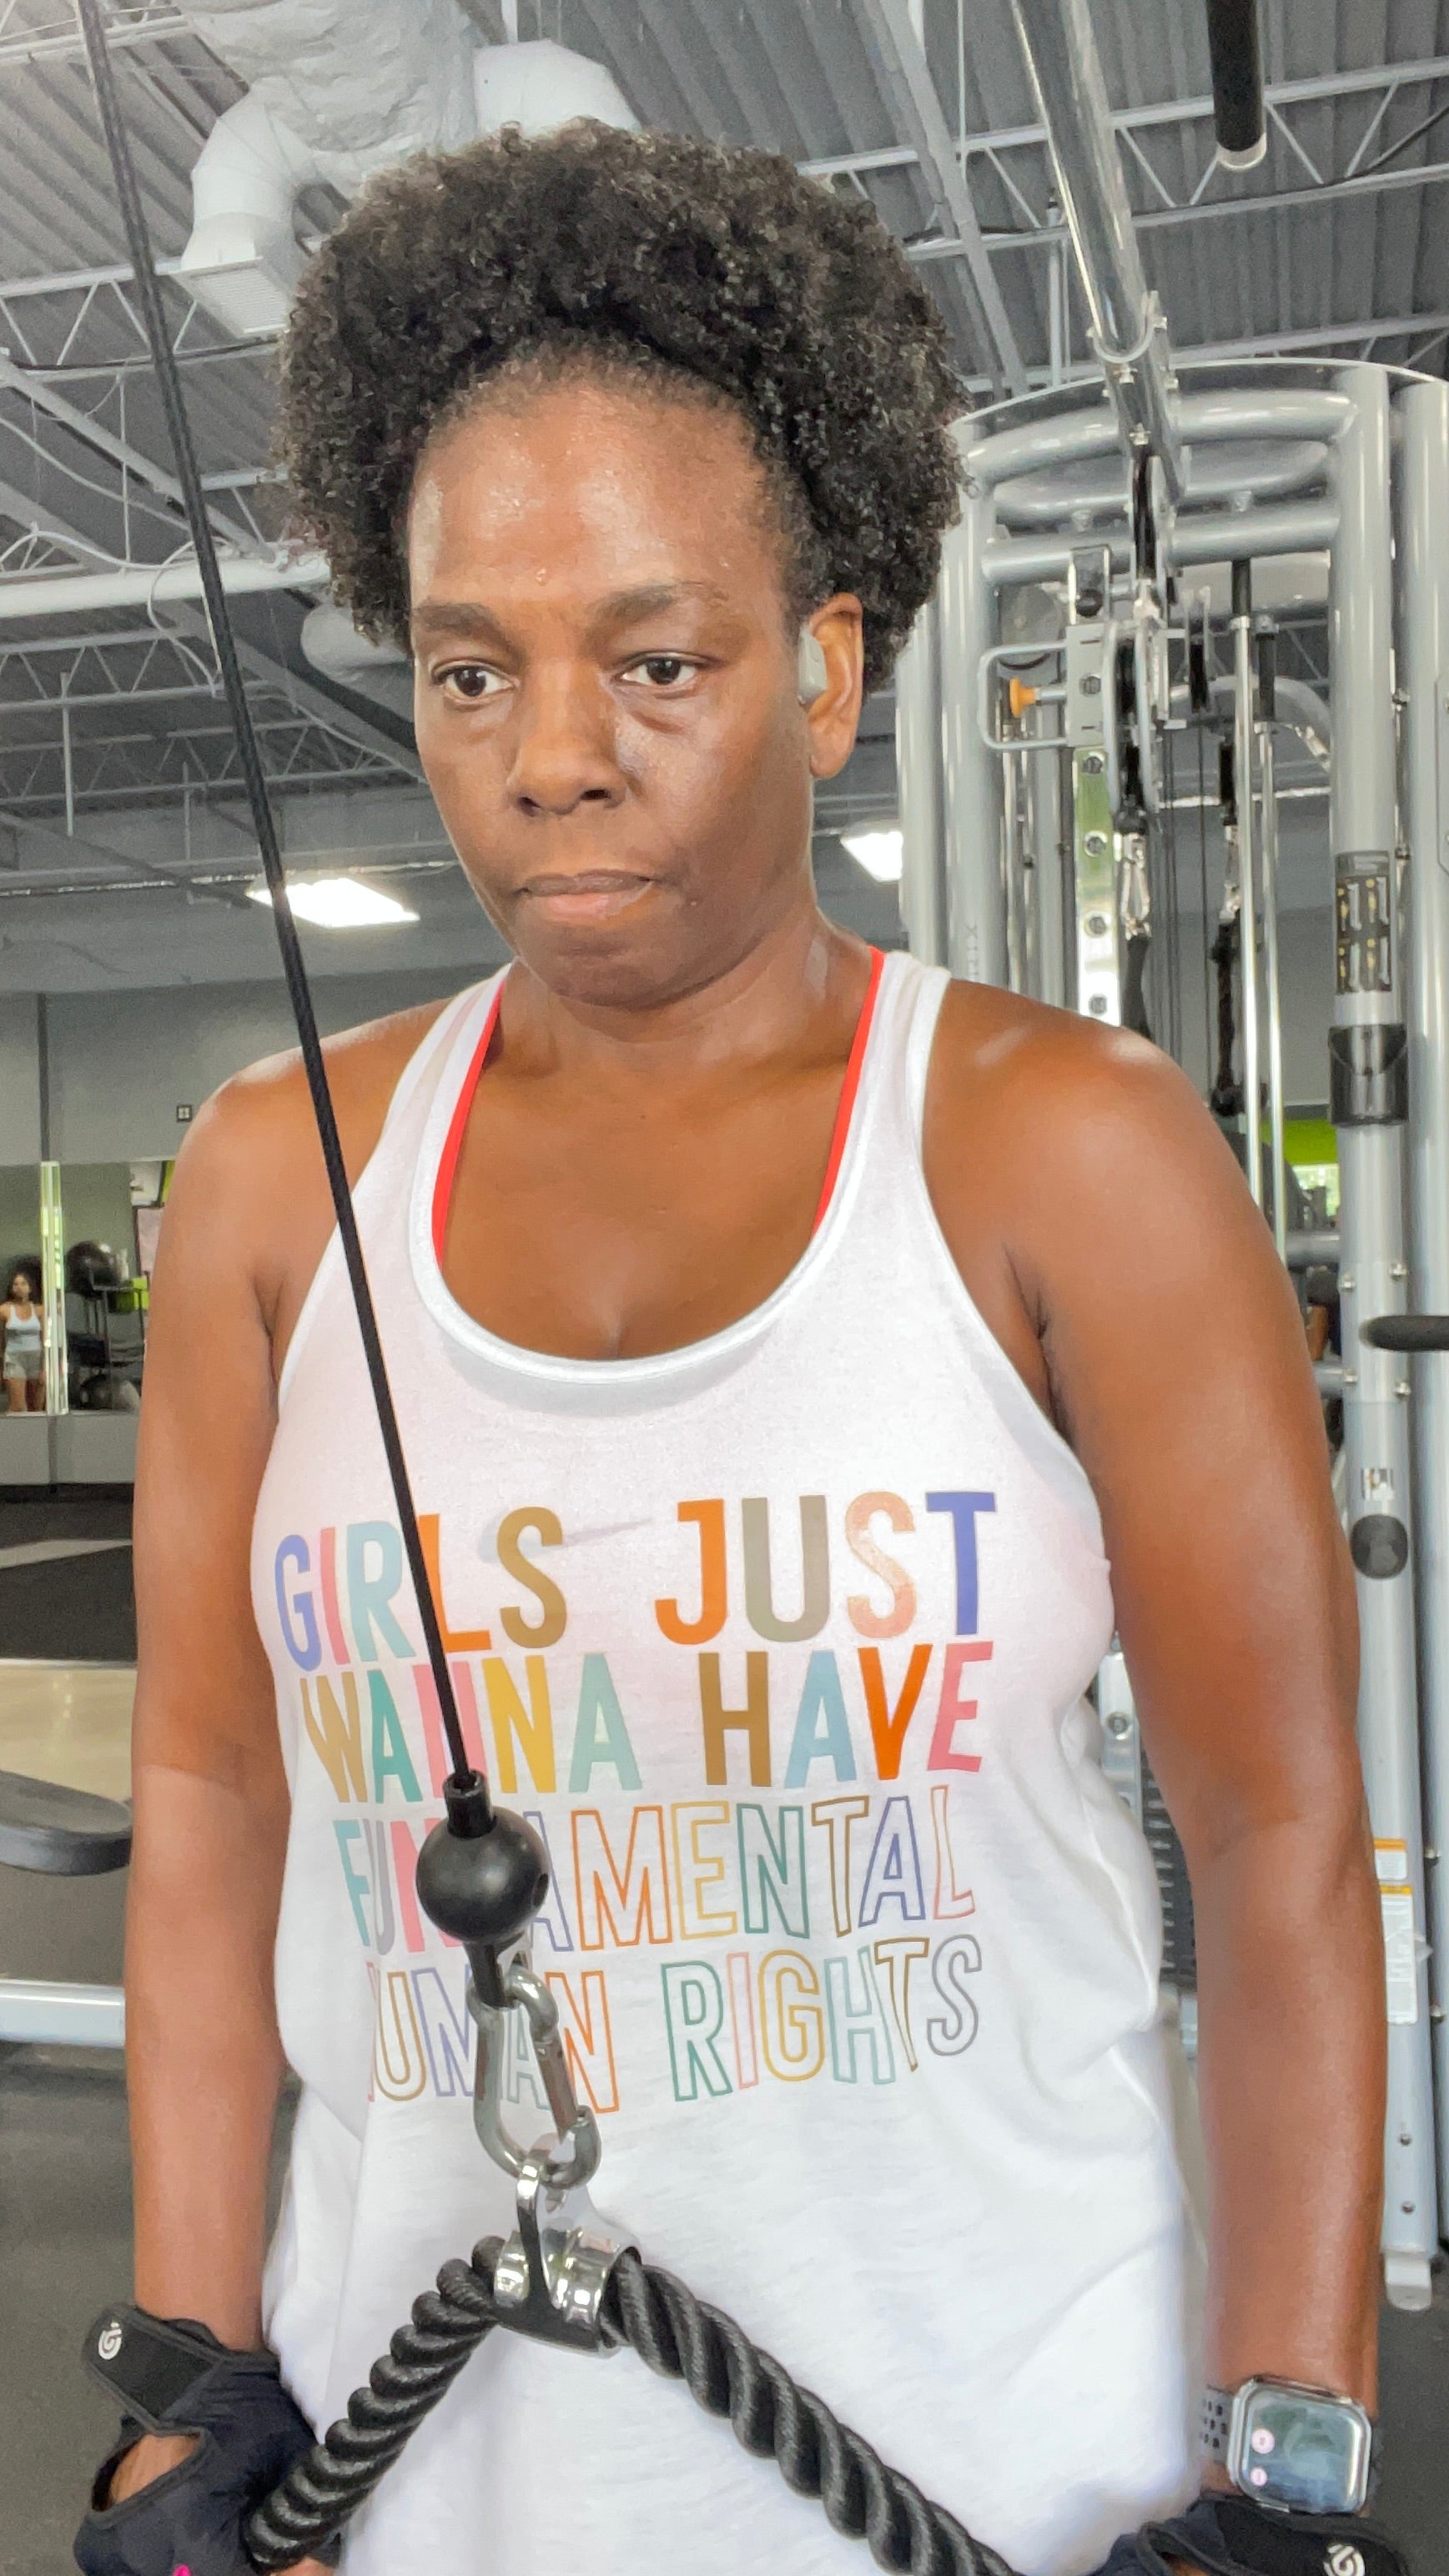 Black girl workout in a white Girls just Wanna Have Fundamental Human Rights fitness tank top.